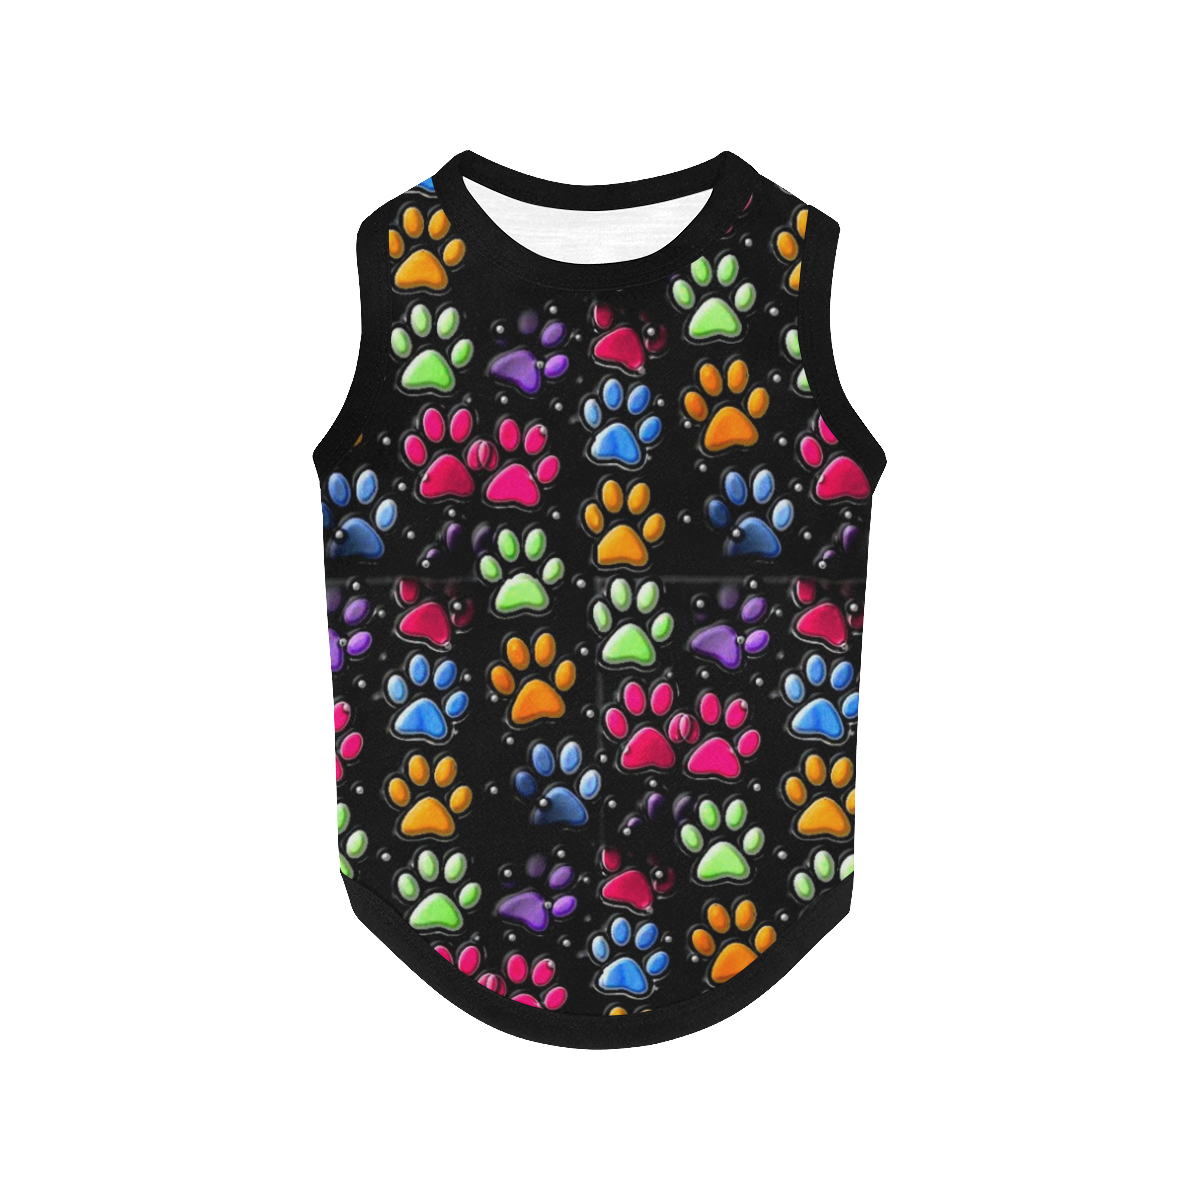 Paws by Nico Bielow All Over Print Pet Tank Top